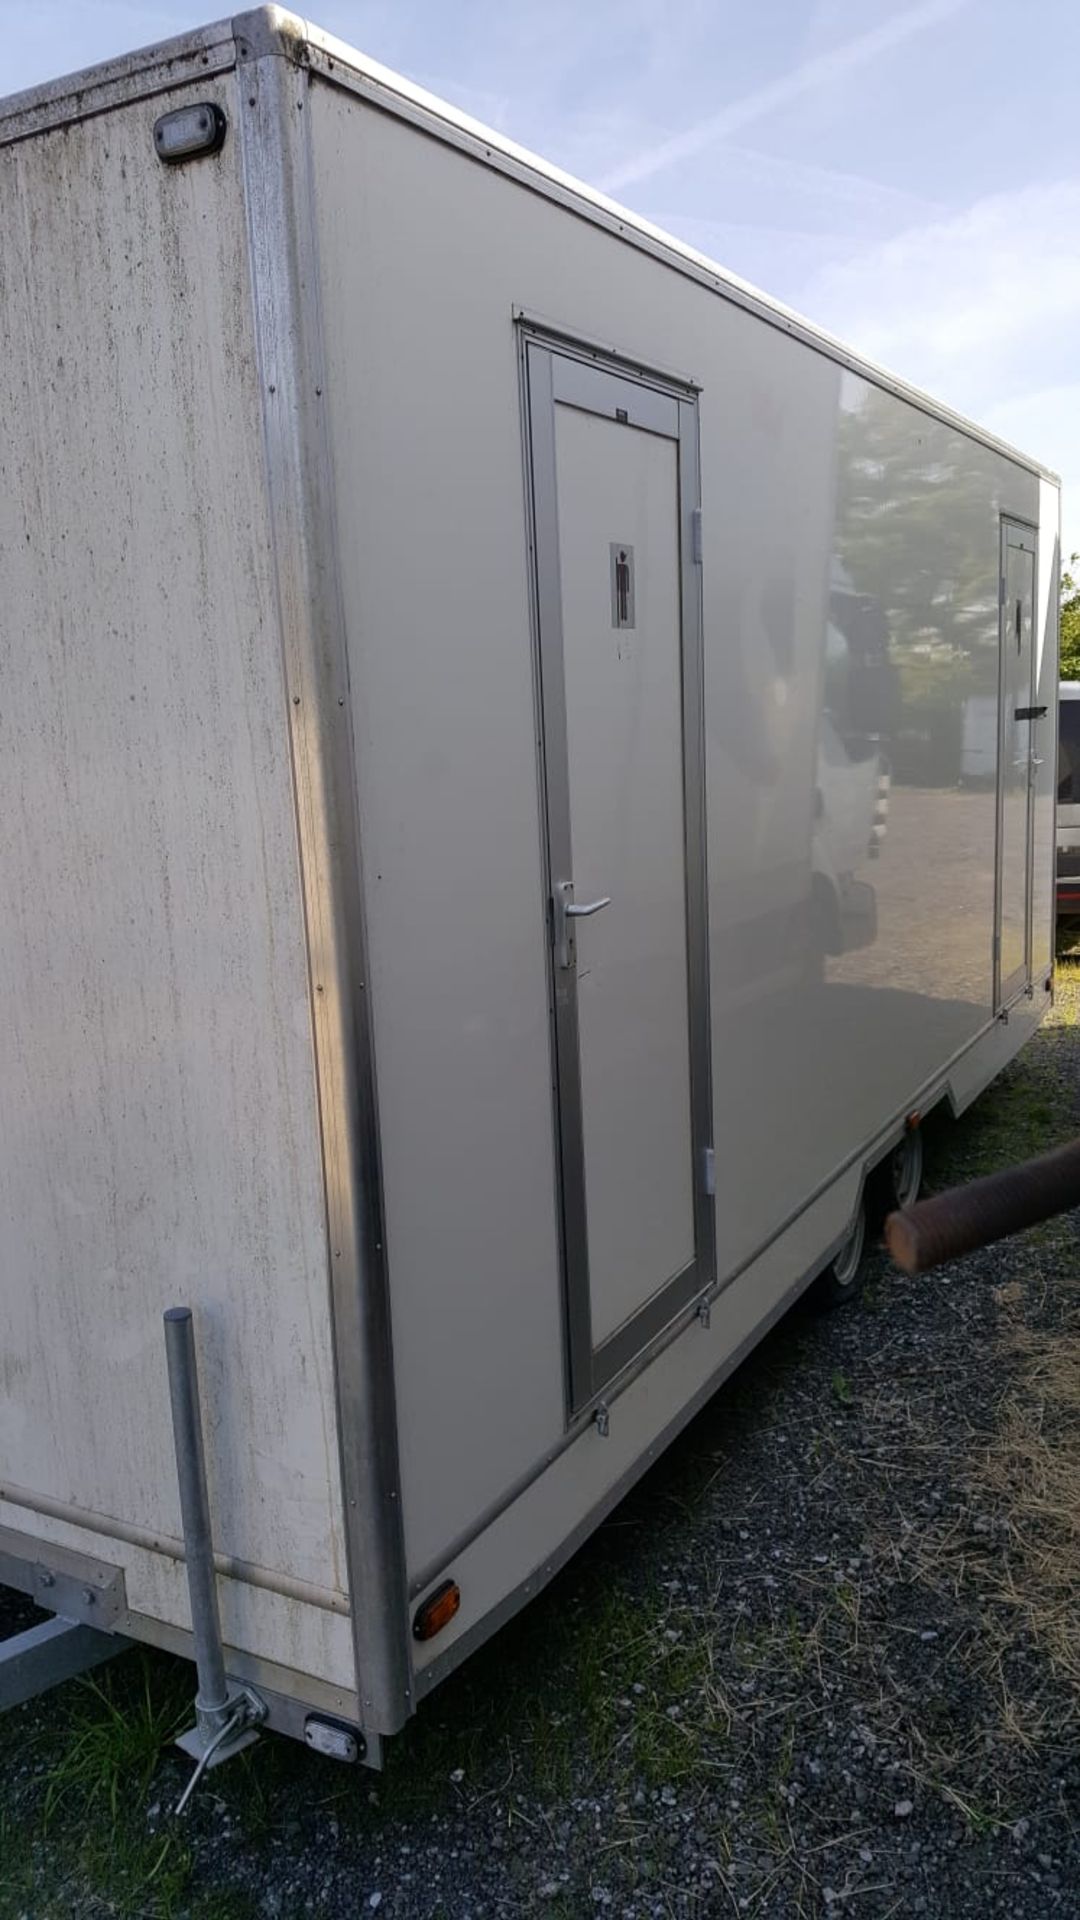 Green Pod Company mobile hospitality male and female trailer toilet block, White modern exteriors - Image 2 of 14